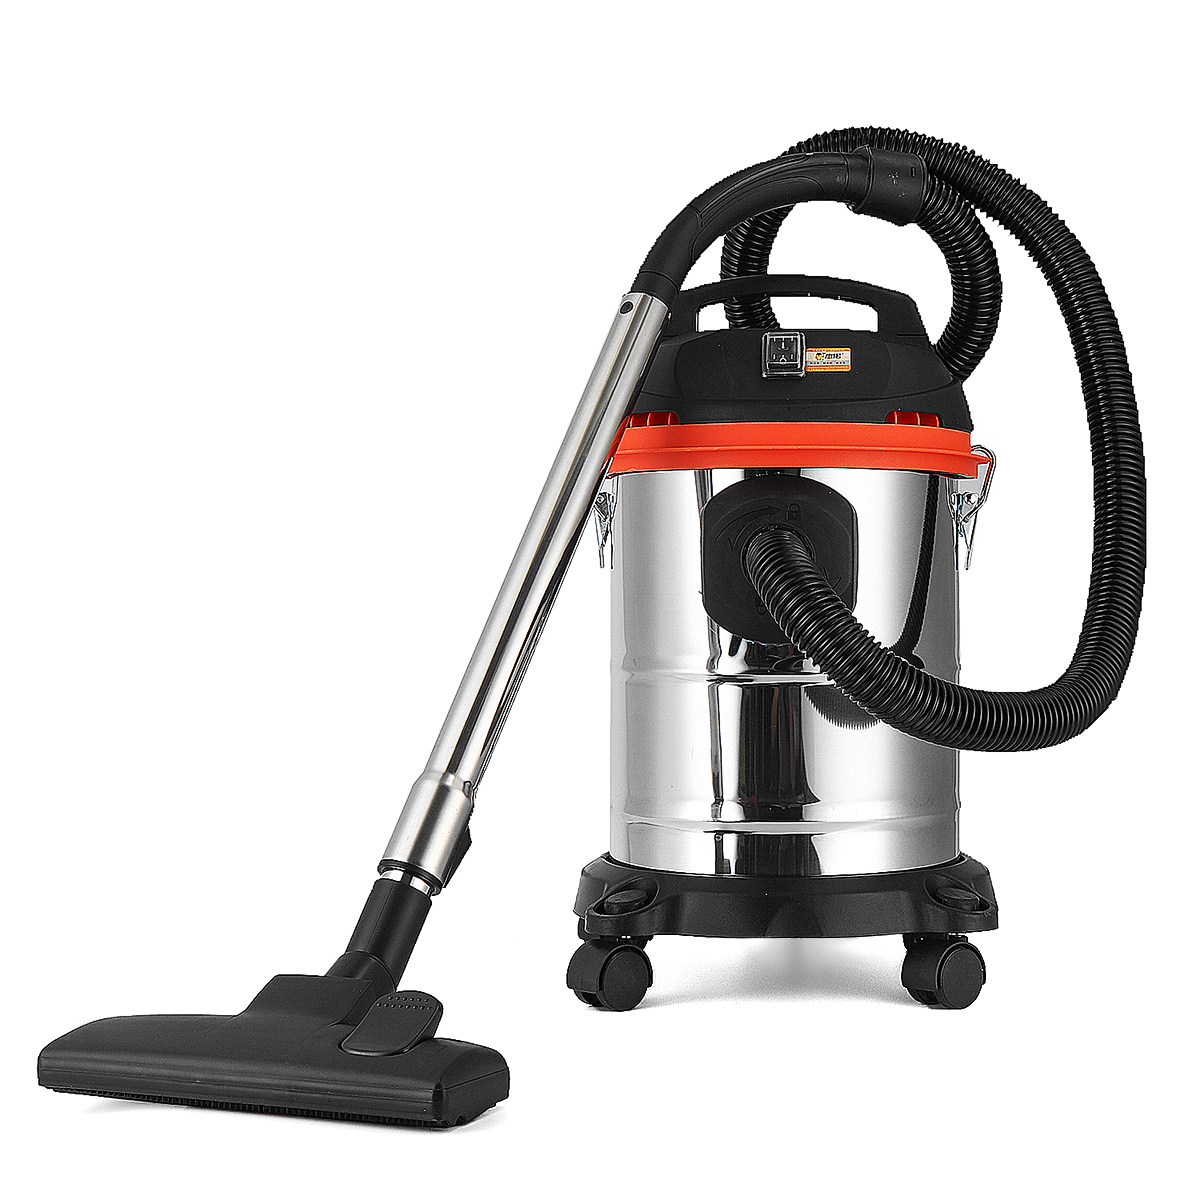 

1200W 15L Stainless Steel Handheld Canister Vacuum Cleaner Wet & Dry Cleaning Home Machine